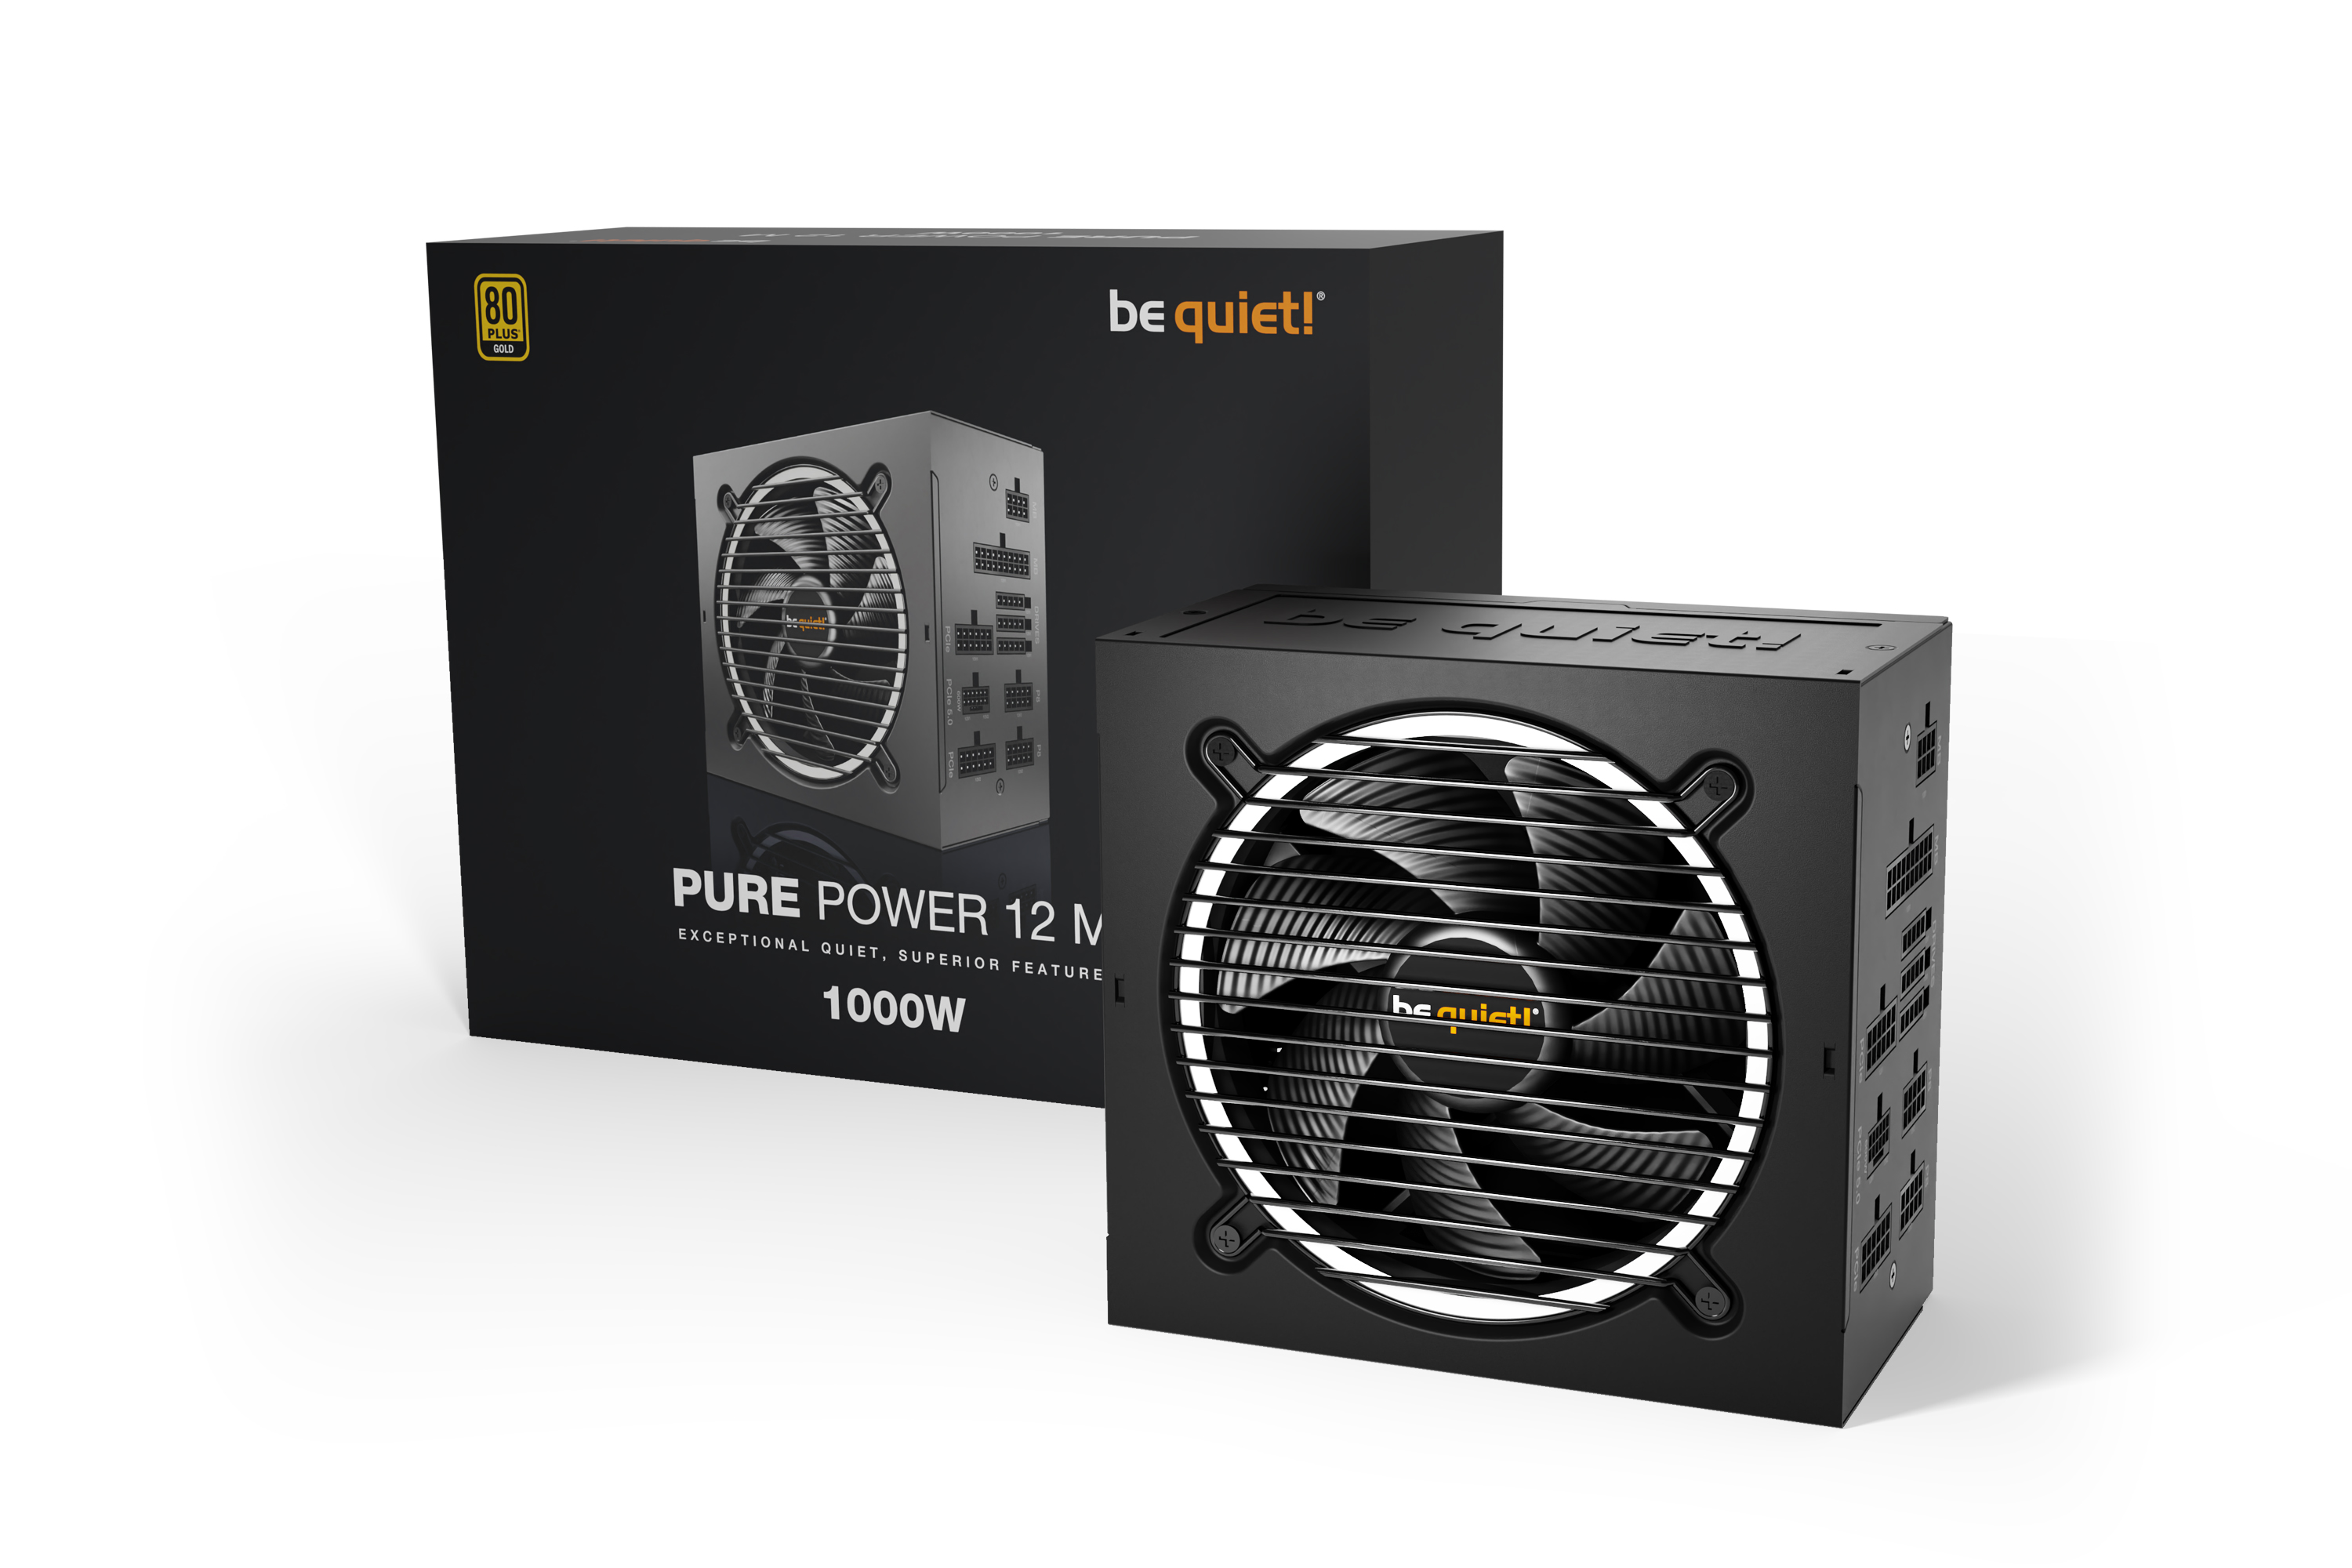   1000W be quiet! Pure Power 12 M (BN345)